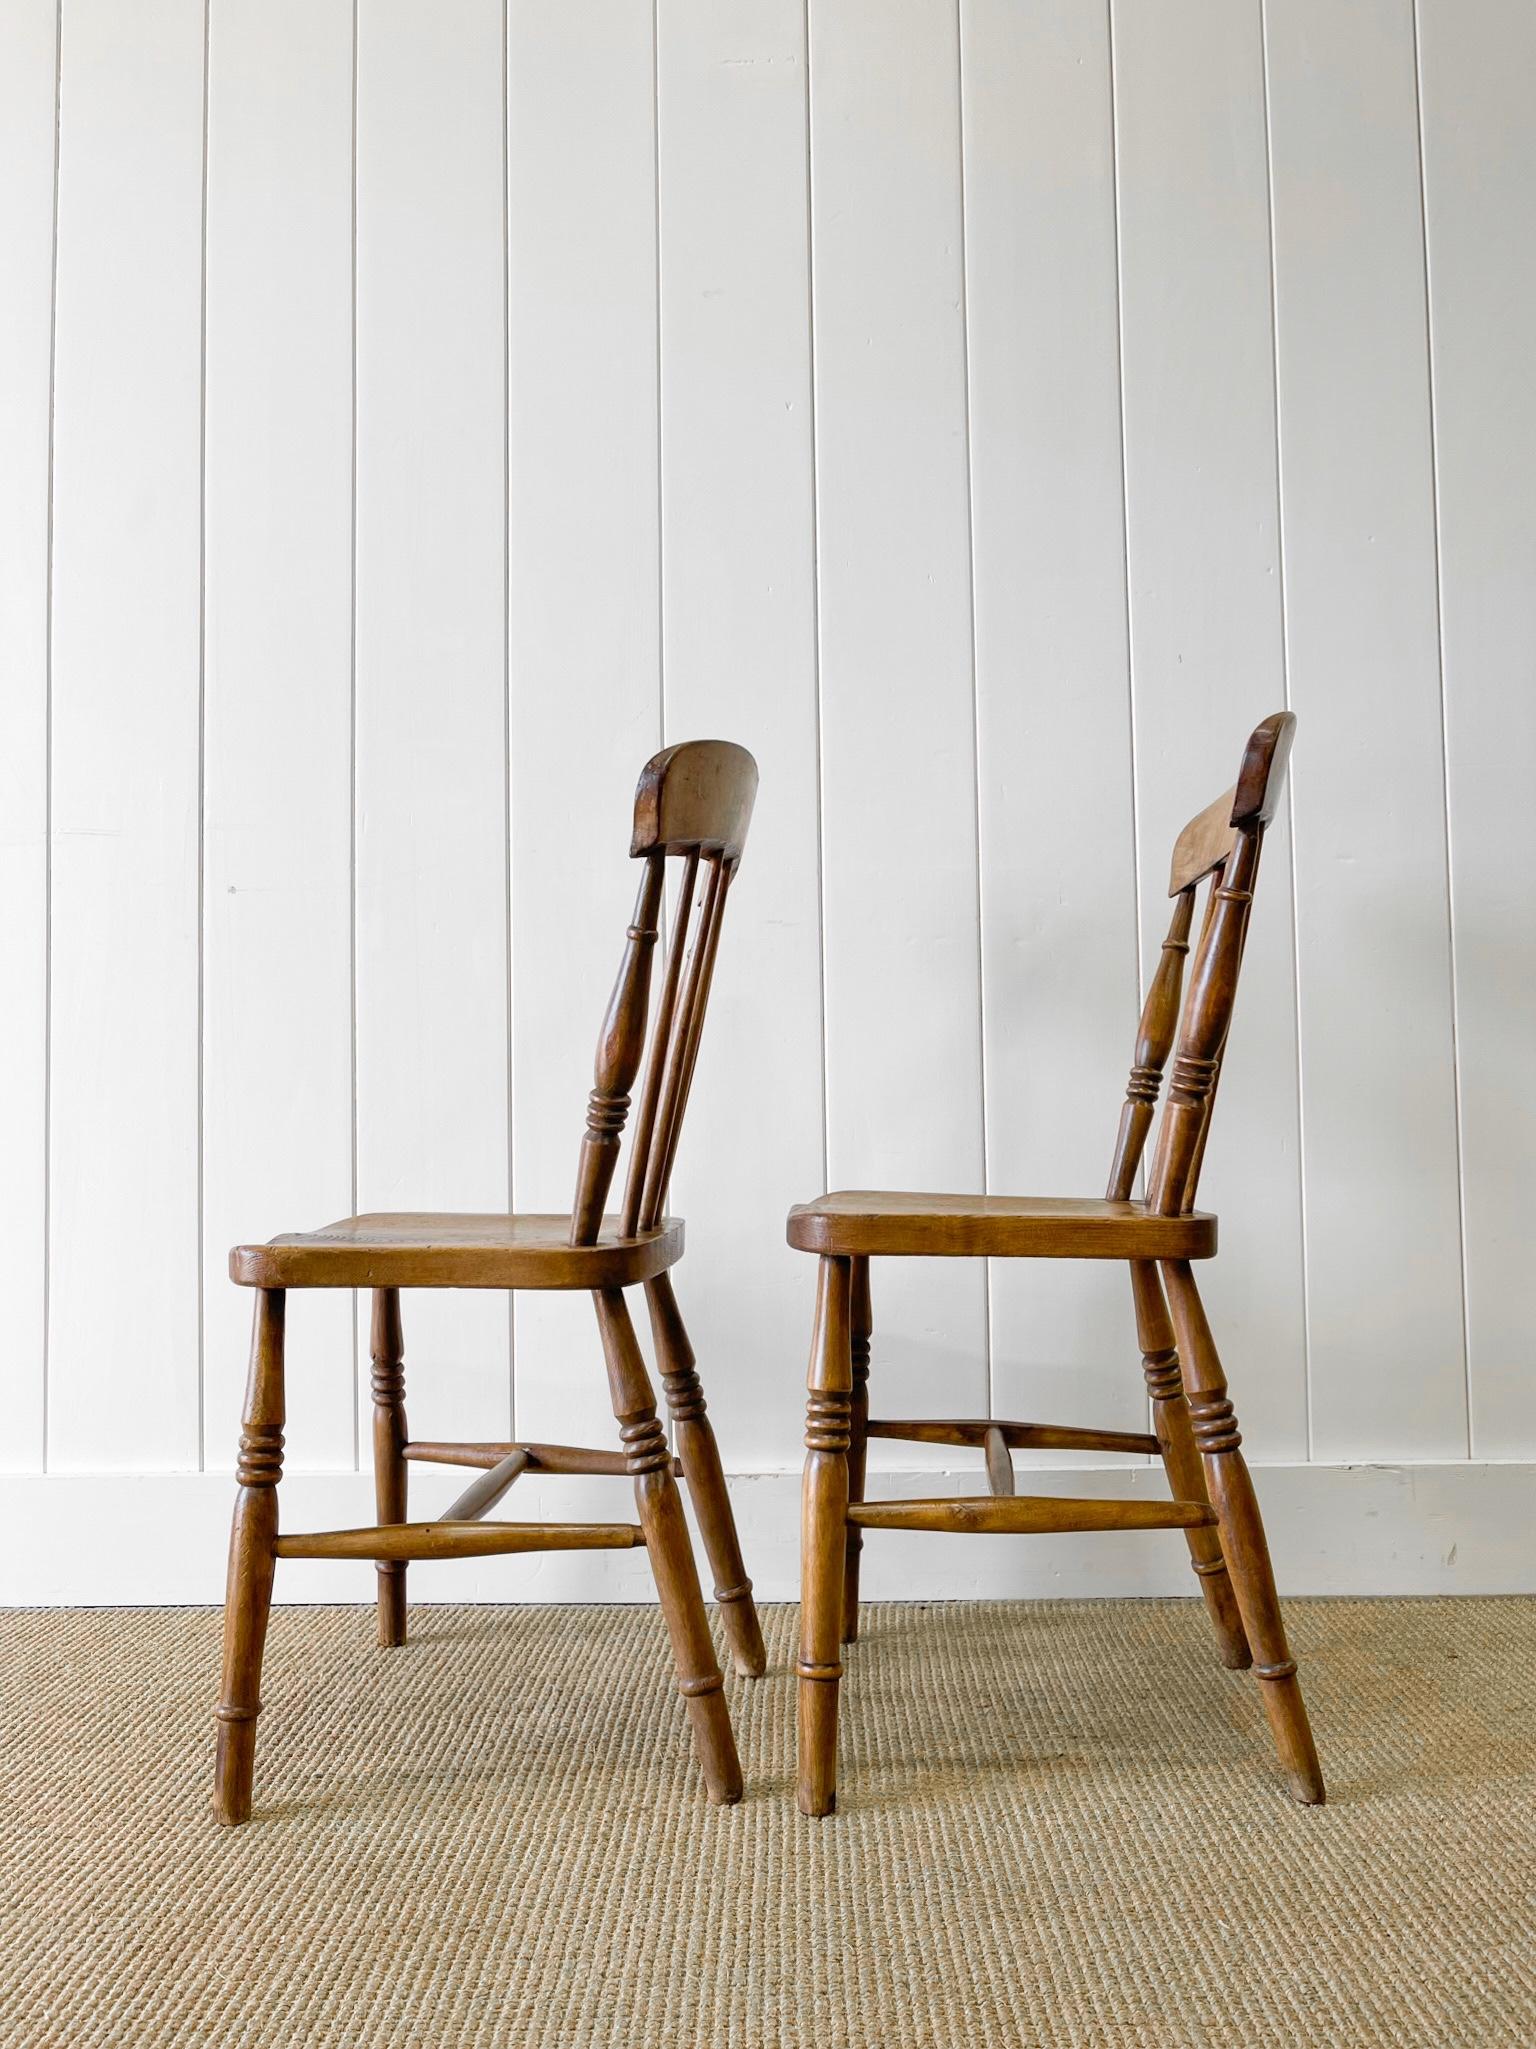 An Antique Set of 4 Early 19th Century Stick Back Chairs For Sale 8